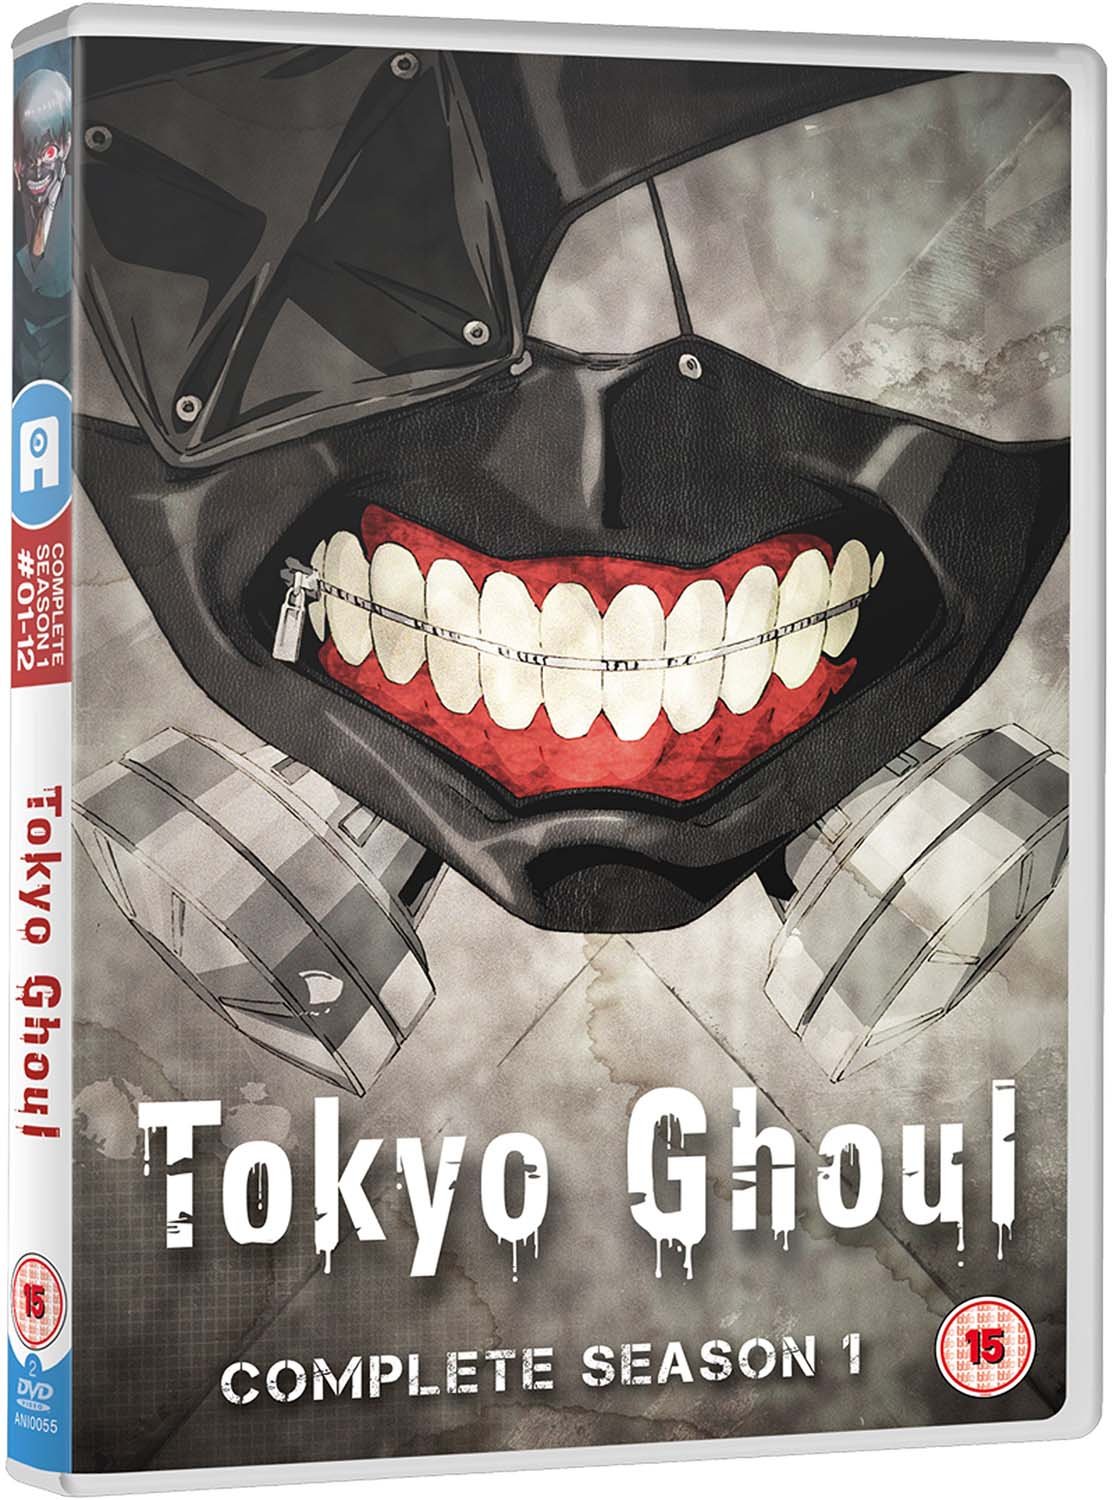 aj fraley recommends Tokyo Ghoul Season 1 Online